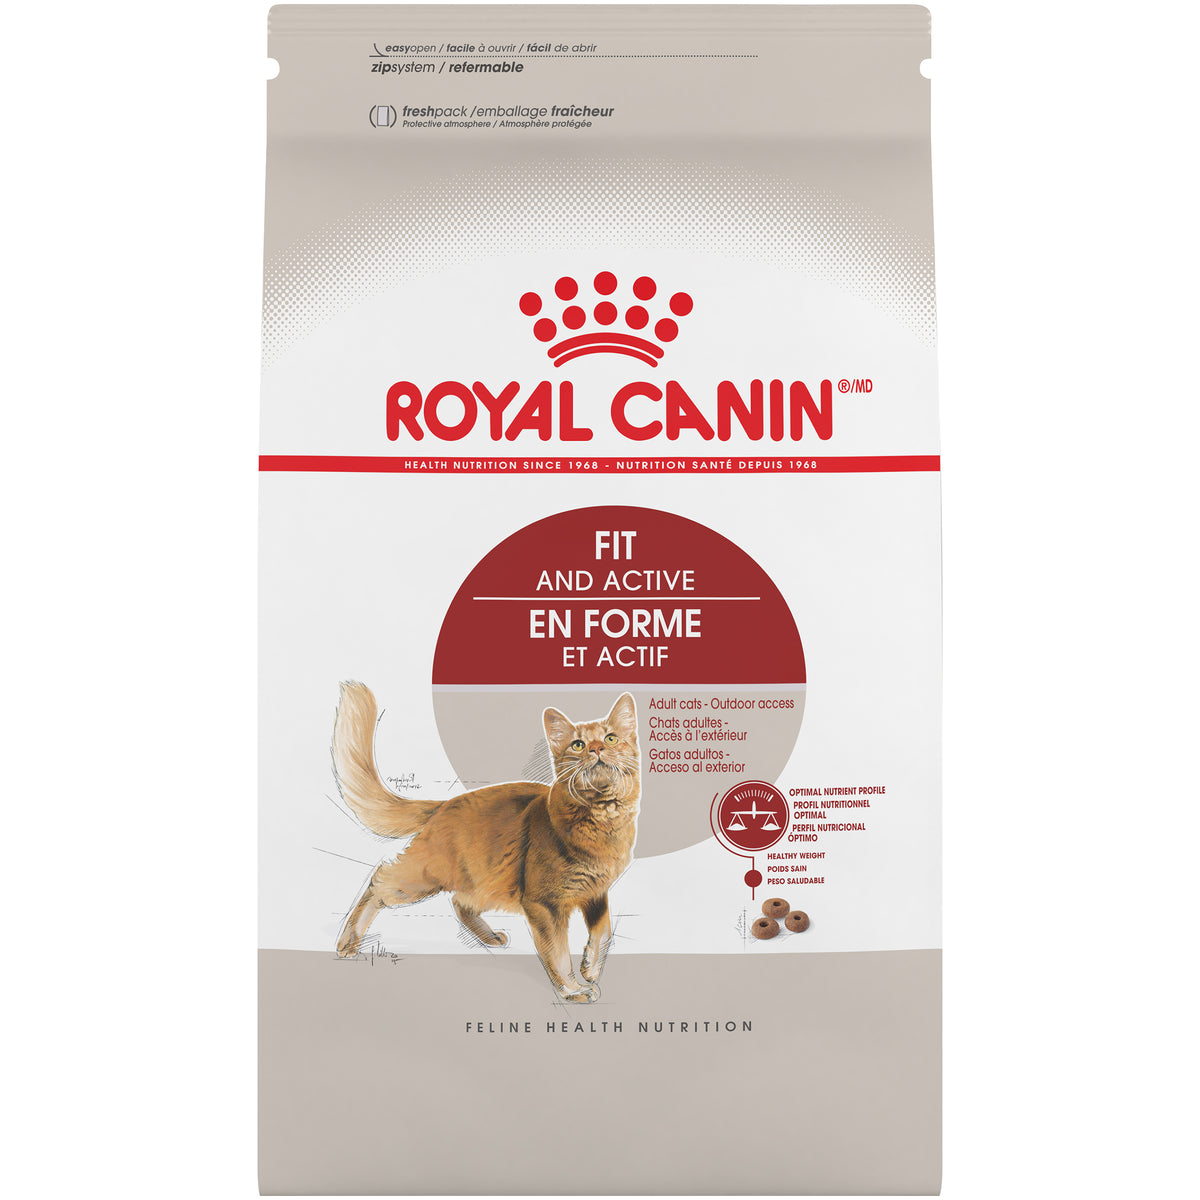 Royal Canin Fit and Active Adult Cat Food